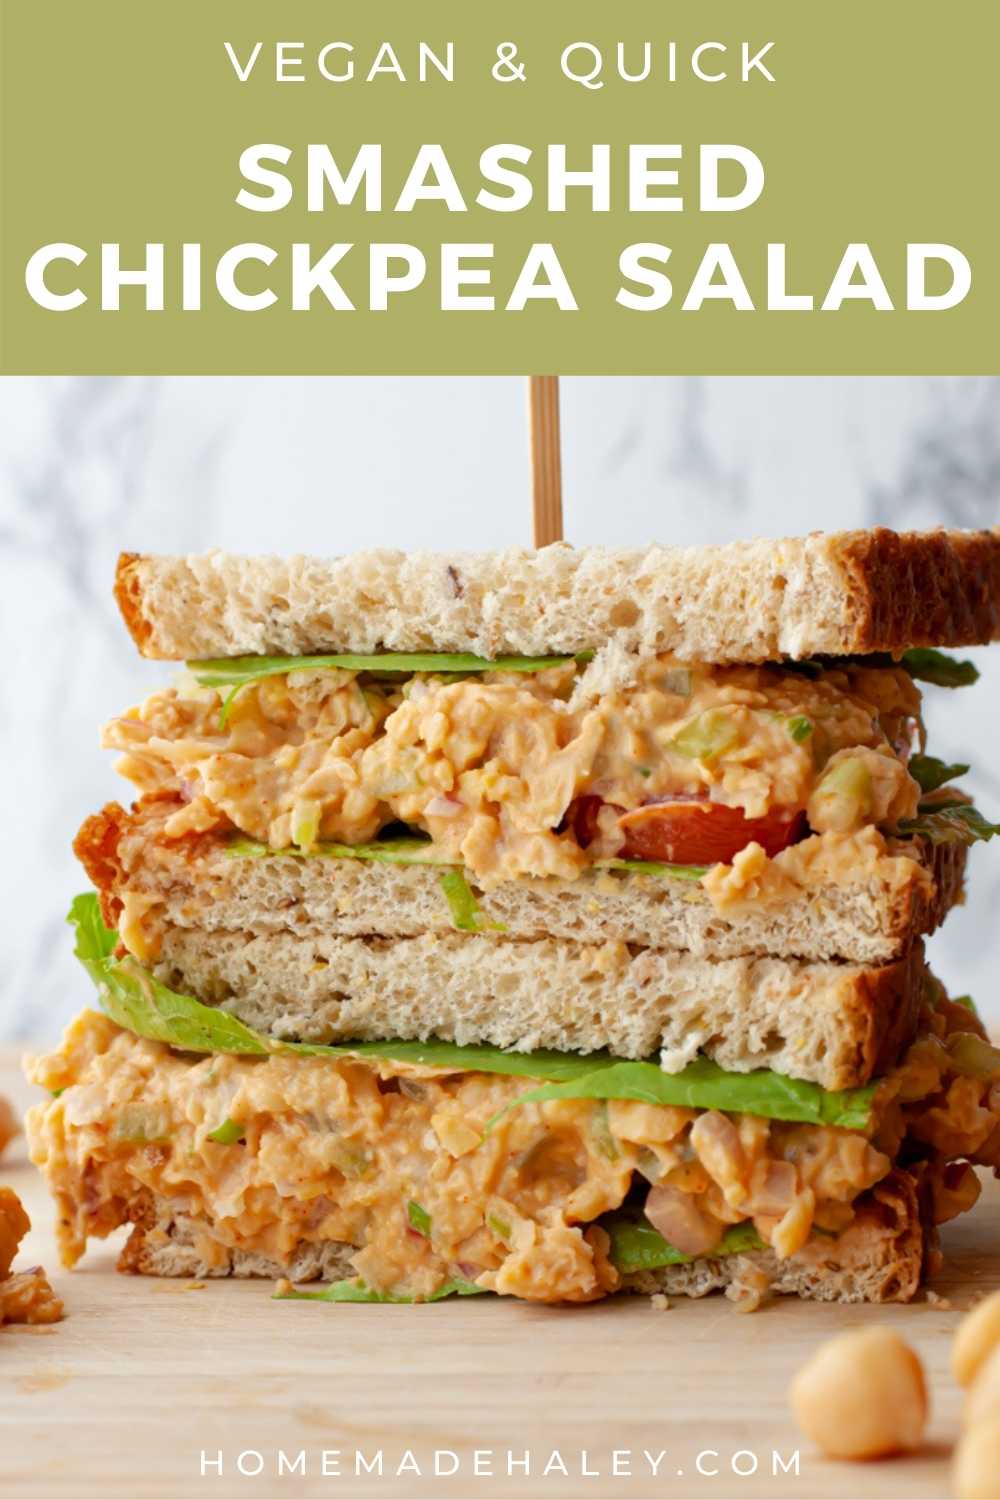 This easy Chickpea Salad Sandwich is a vegan & customizable spin on tuna salad. Made in a jiff using canned chickpeas and tangy condiments! Use on your favorite bread, lettuce leaf, or tortilla wrap.  It will be your family's new favorite filling, healthy and versatile lunch! #veganlunch #chickpesalad #easyveganlunch